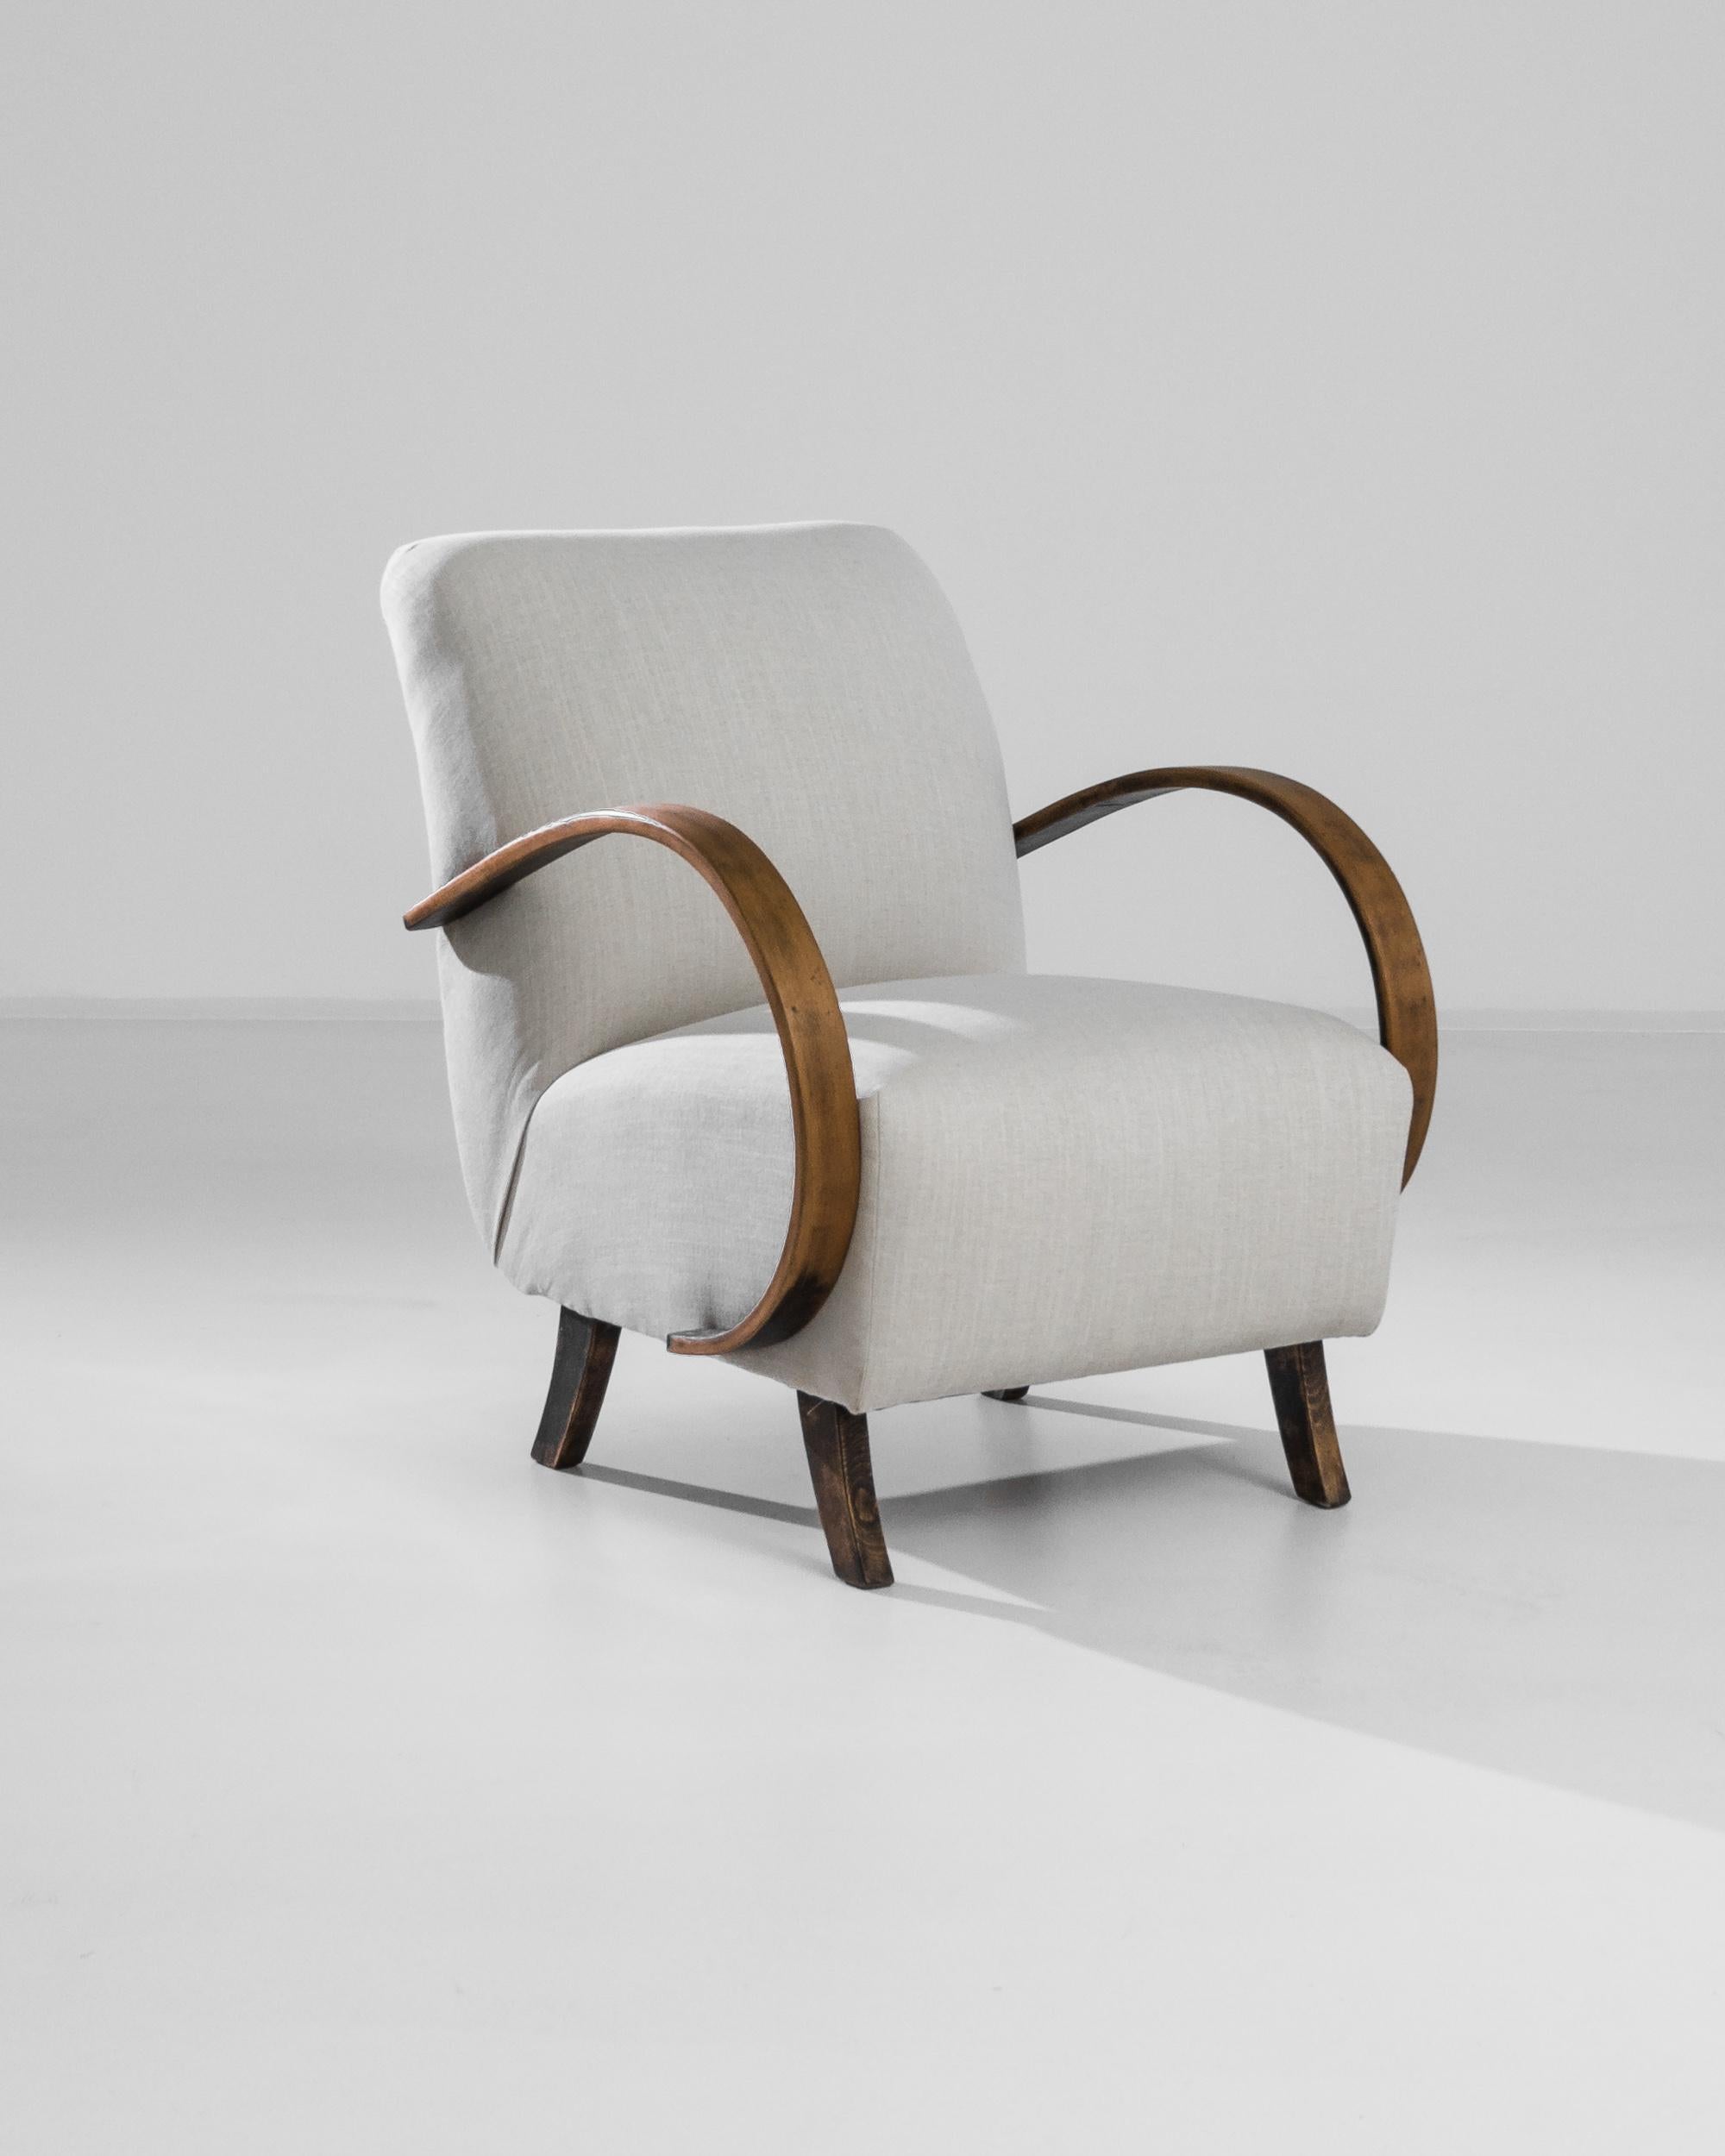 An armchair by Czech furniture designer Jindrich Halabala. Influenced by Modern and Art Deco design, a deep cushioned seat leans upon angled wooden feet, framed by swooping bentwood armrests. The smooth polish of the wooden arms, weathered to a rich